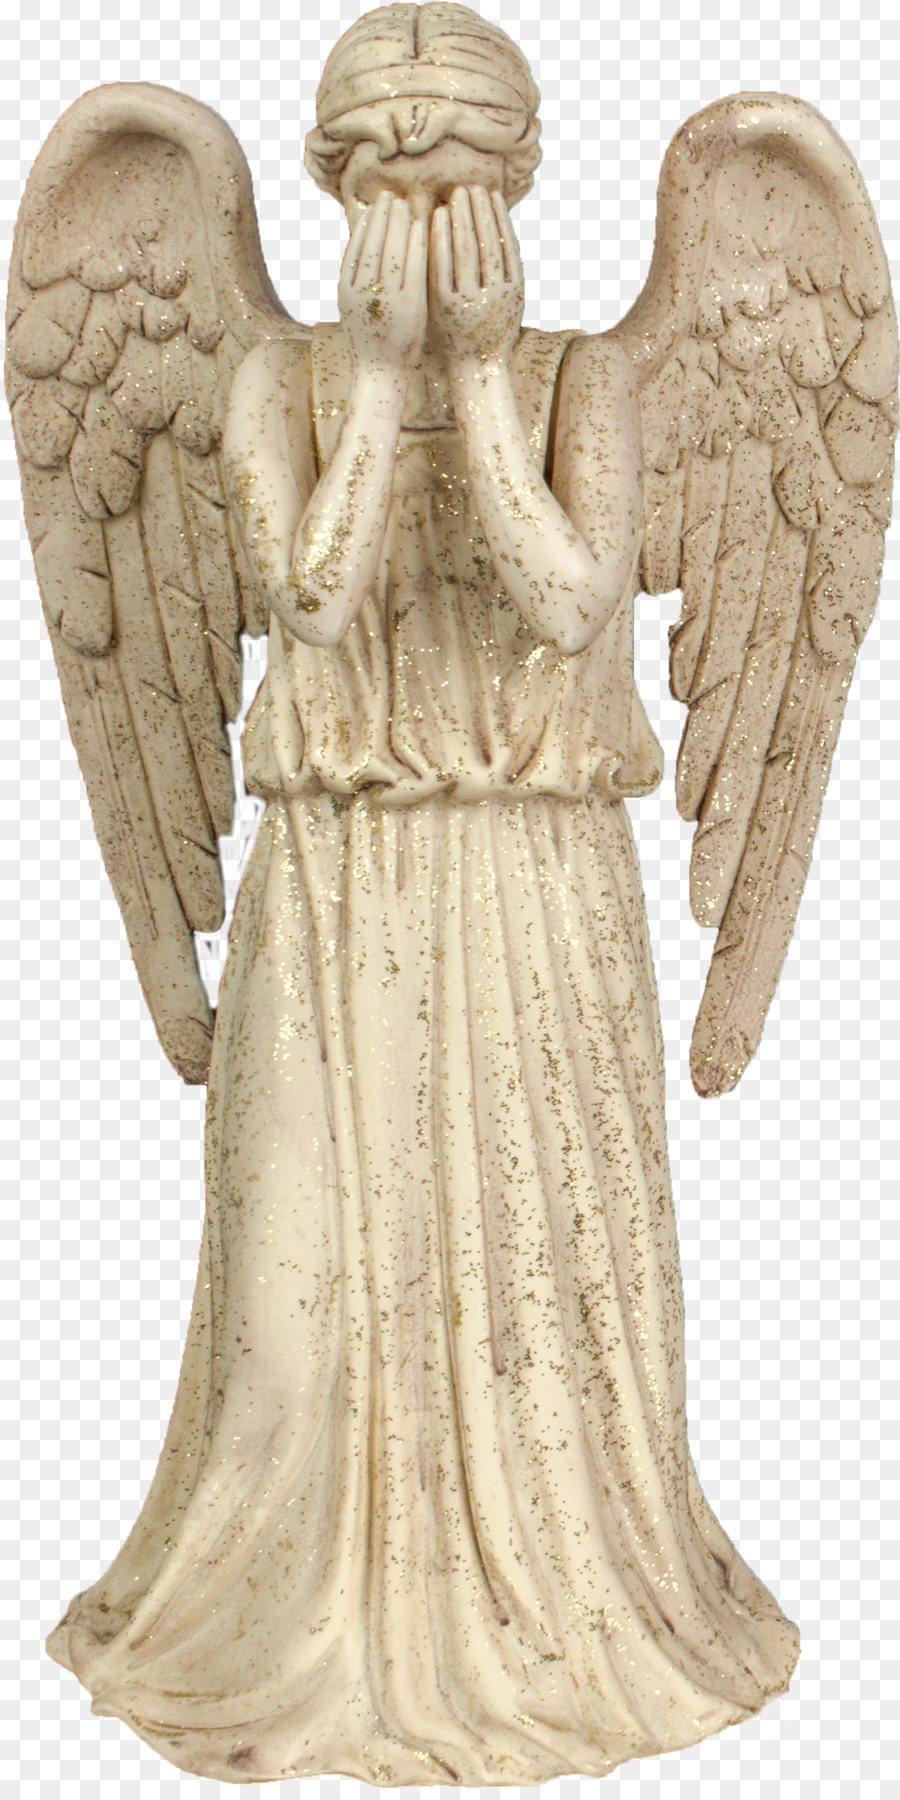 Tree-topper Christmas ornament Weeping Angel - Angels png download - 1484*2948 - Free Transparent Treetopper png Download.